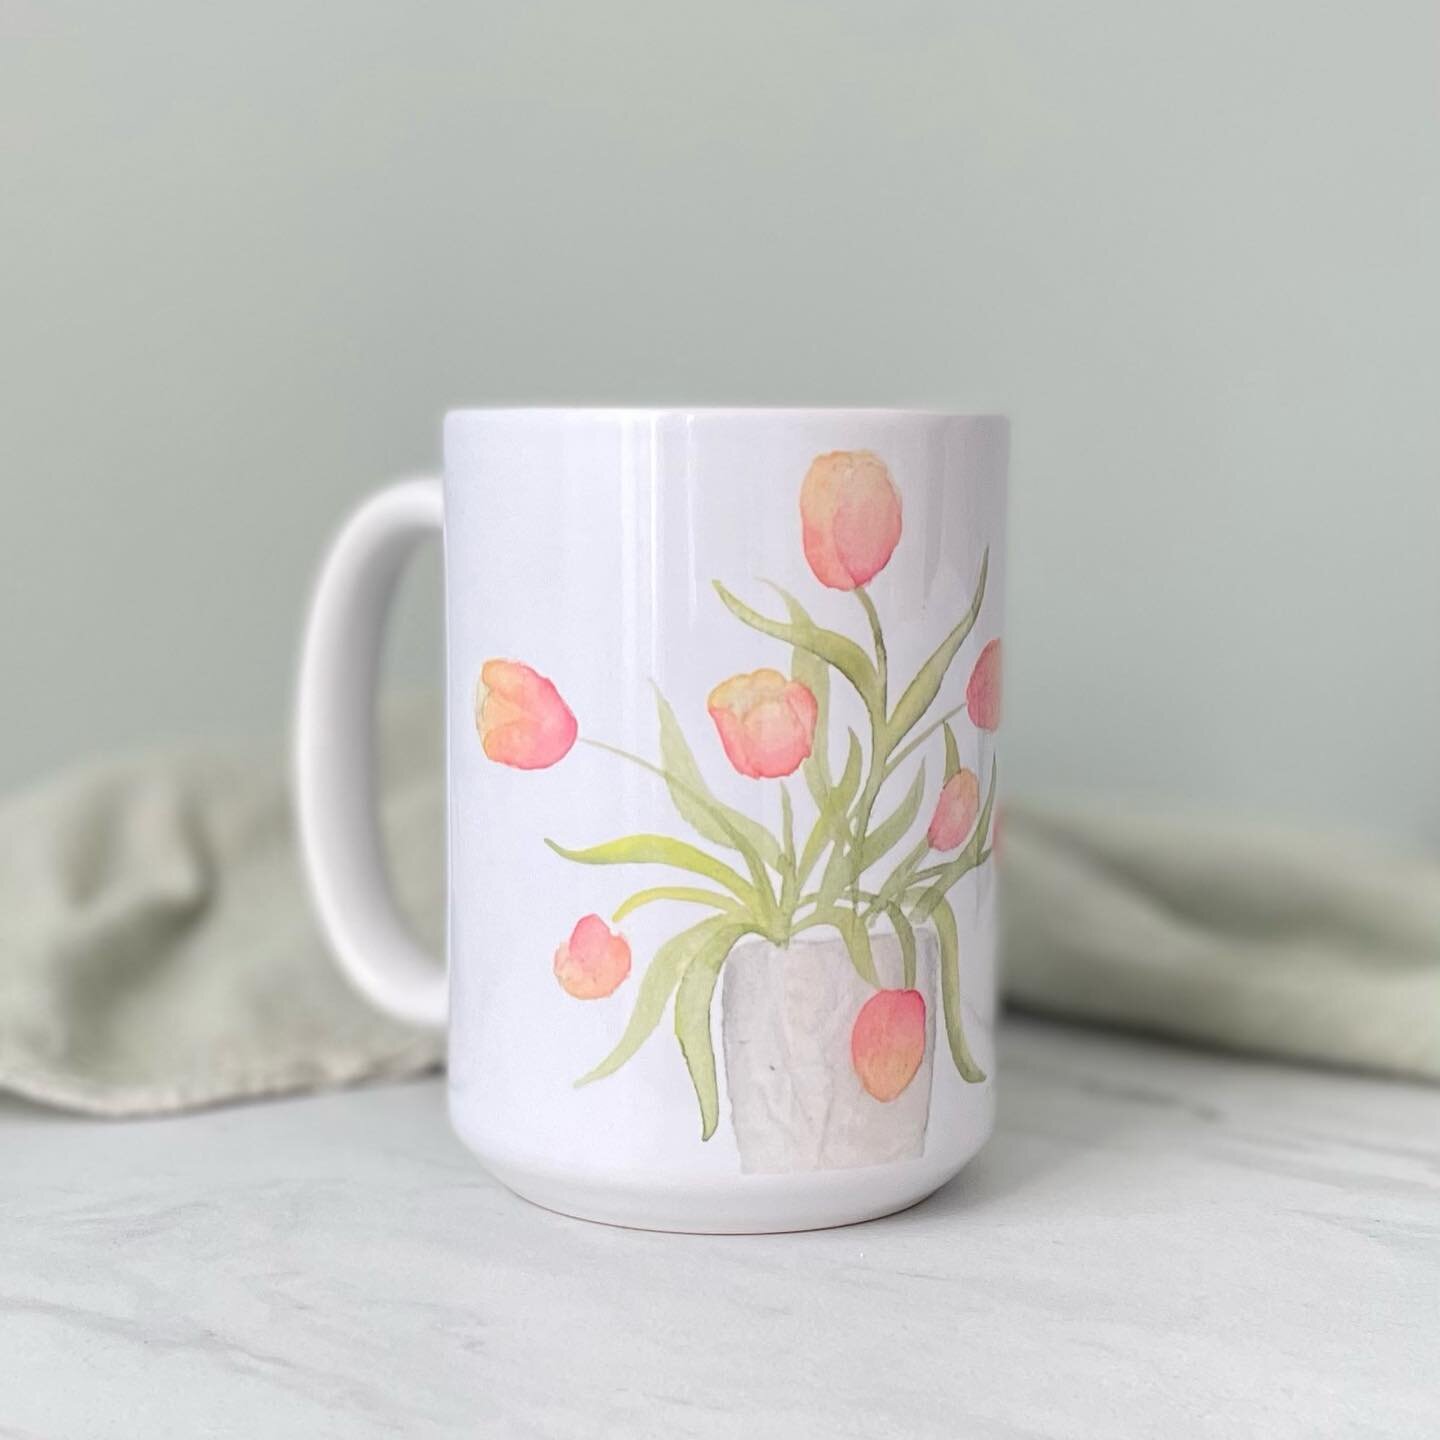 Everyday this week I will be sharing one new item that will be released at the Winterthur Artisan Market this weekend!! Kicking it off with the new tulip mug, one of my favorites for summertime tea!